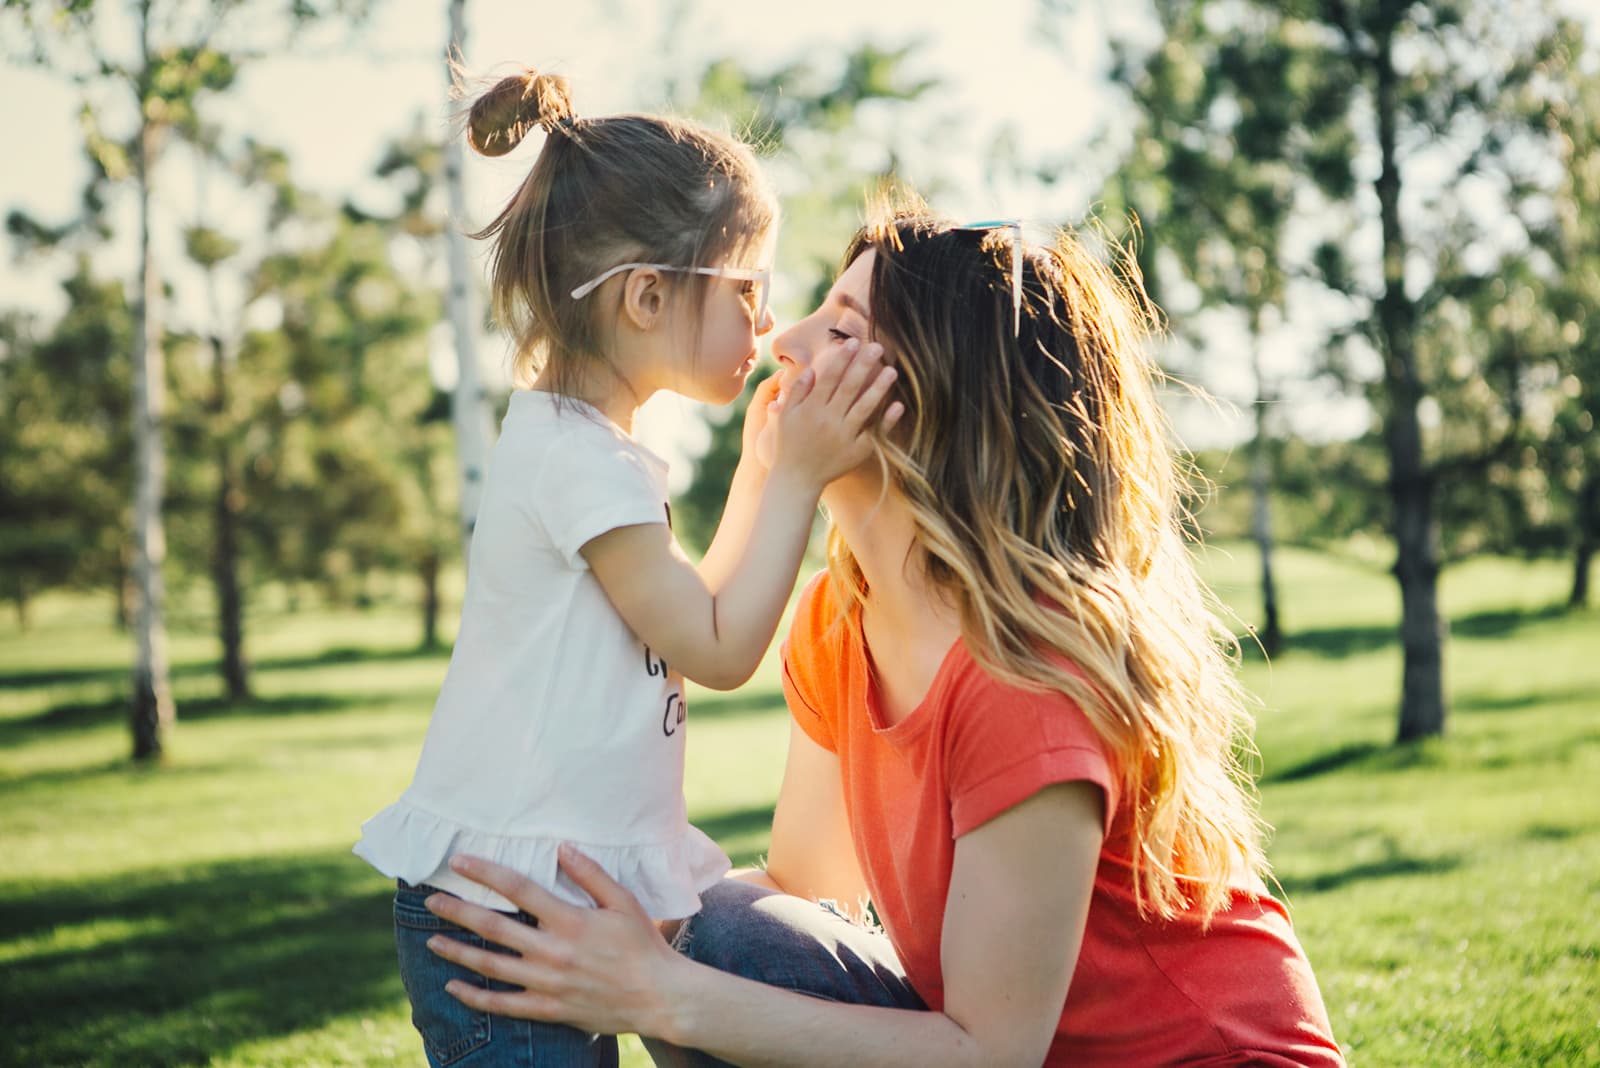 13 Rules I’ll Teach My Daughter To Live By